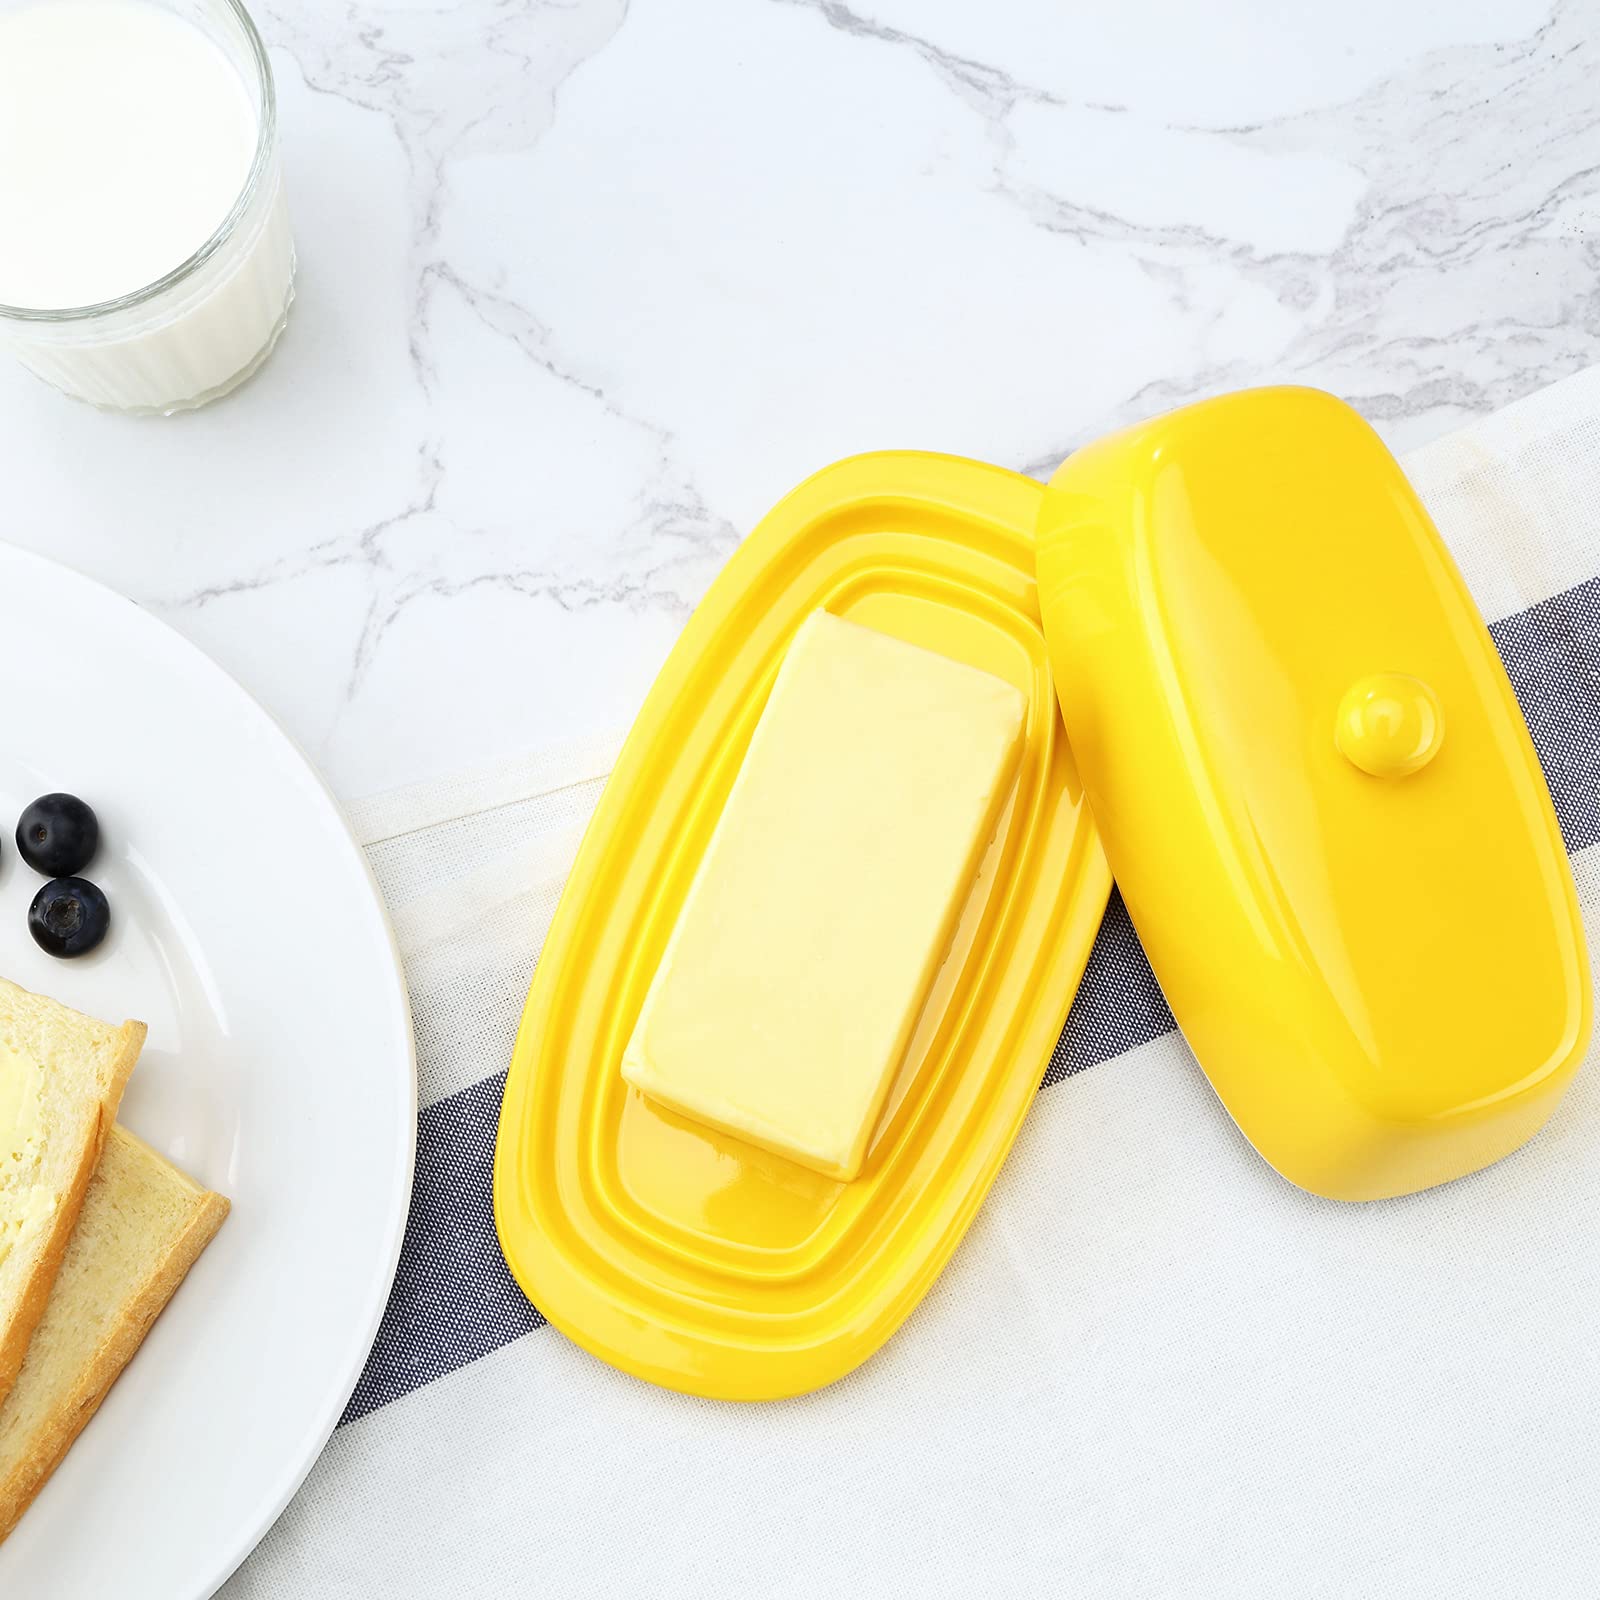 Yedio Porcelain Butter Dish with Lid White and Yellow